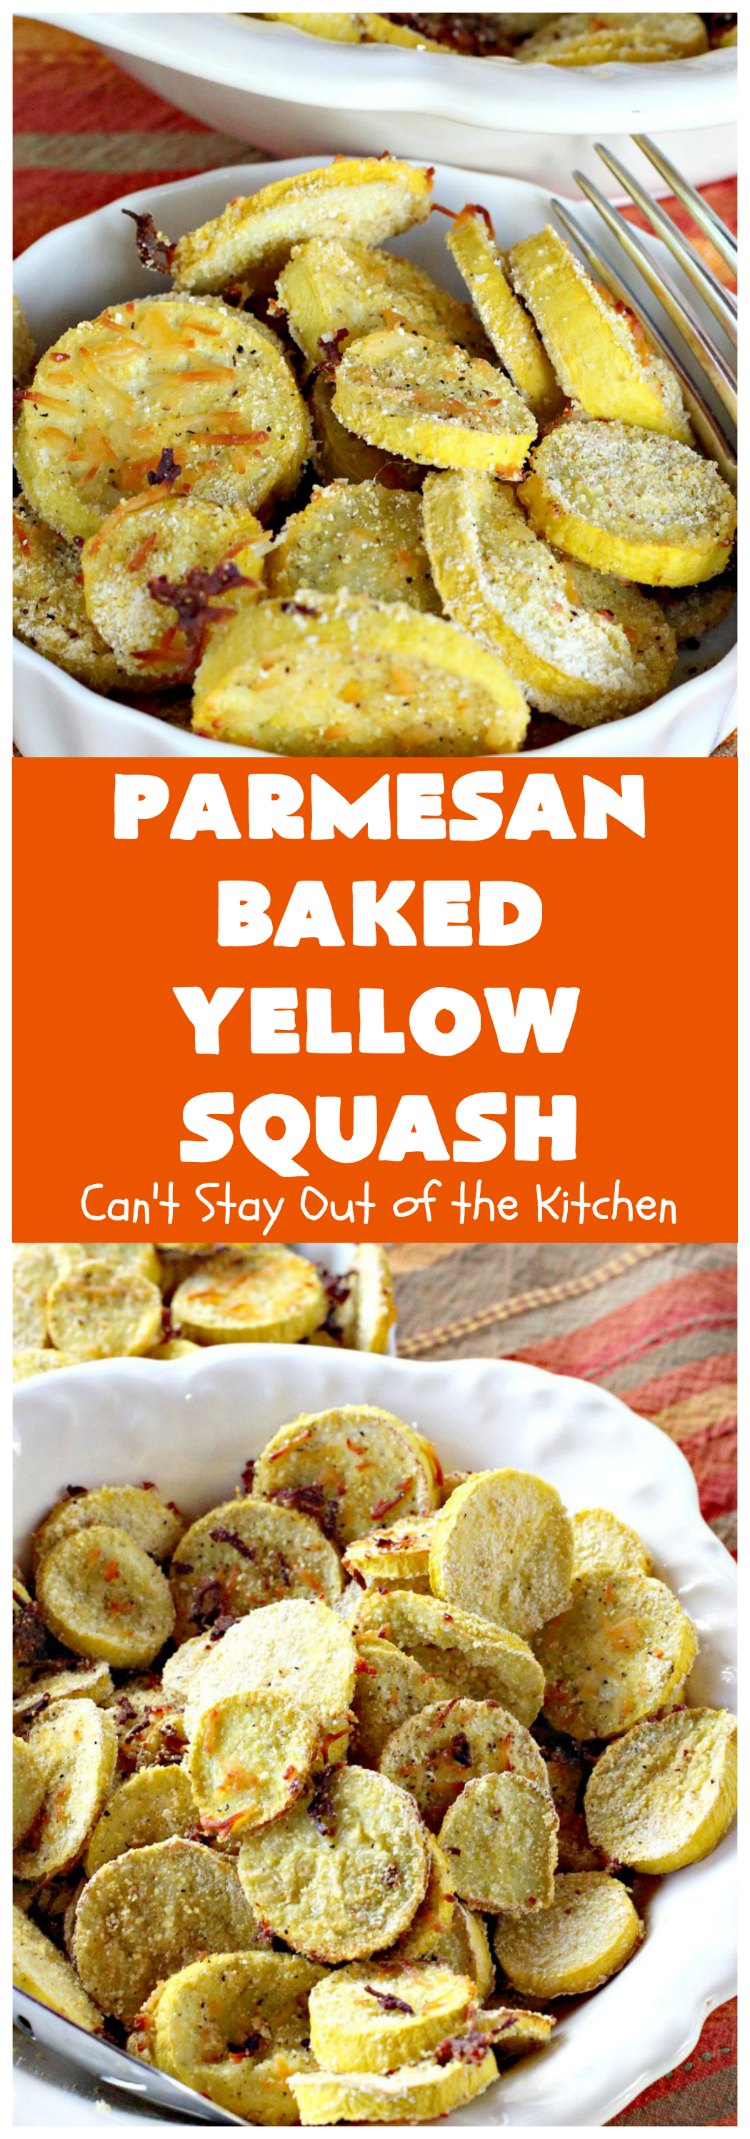 Fried Eggplant Yellow Squash Or Zucchini Can T Stay Out Of The Kitchen,1st Anniversary Ideas For Couples